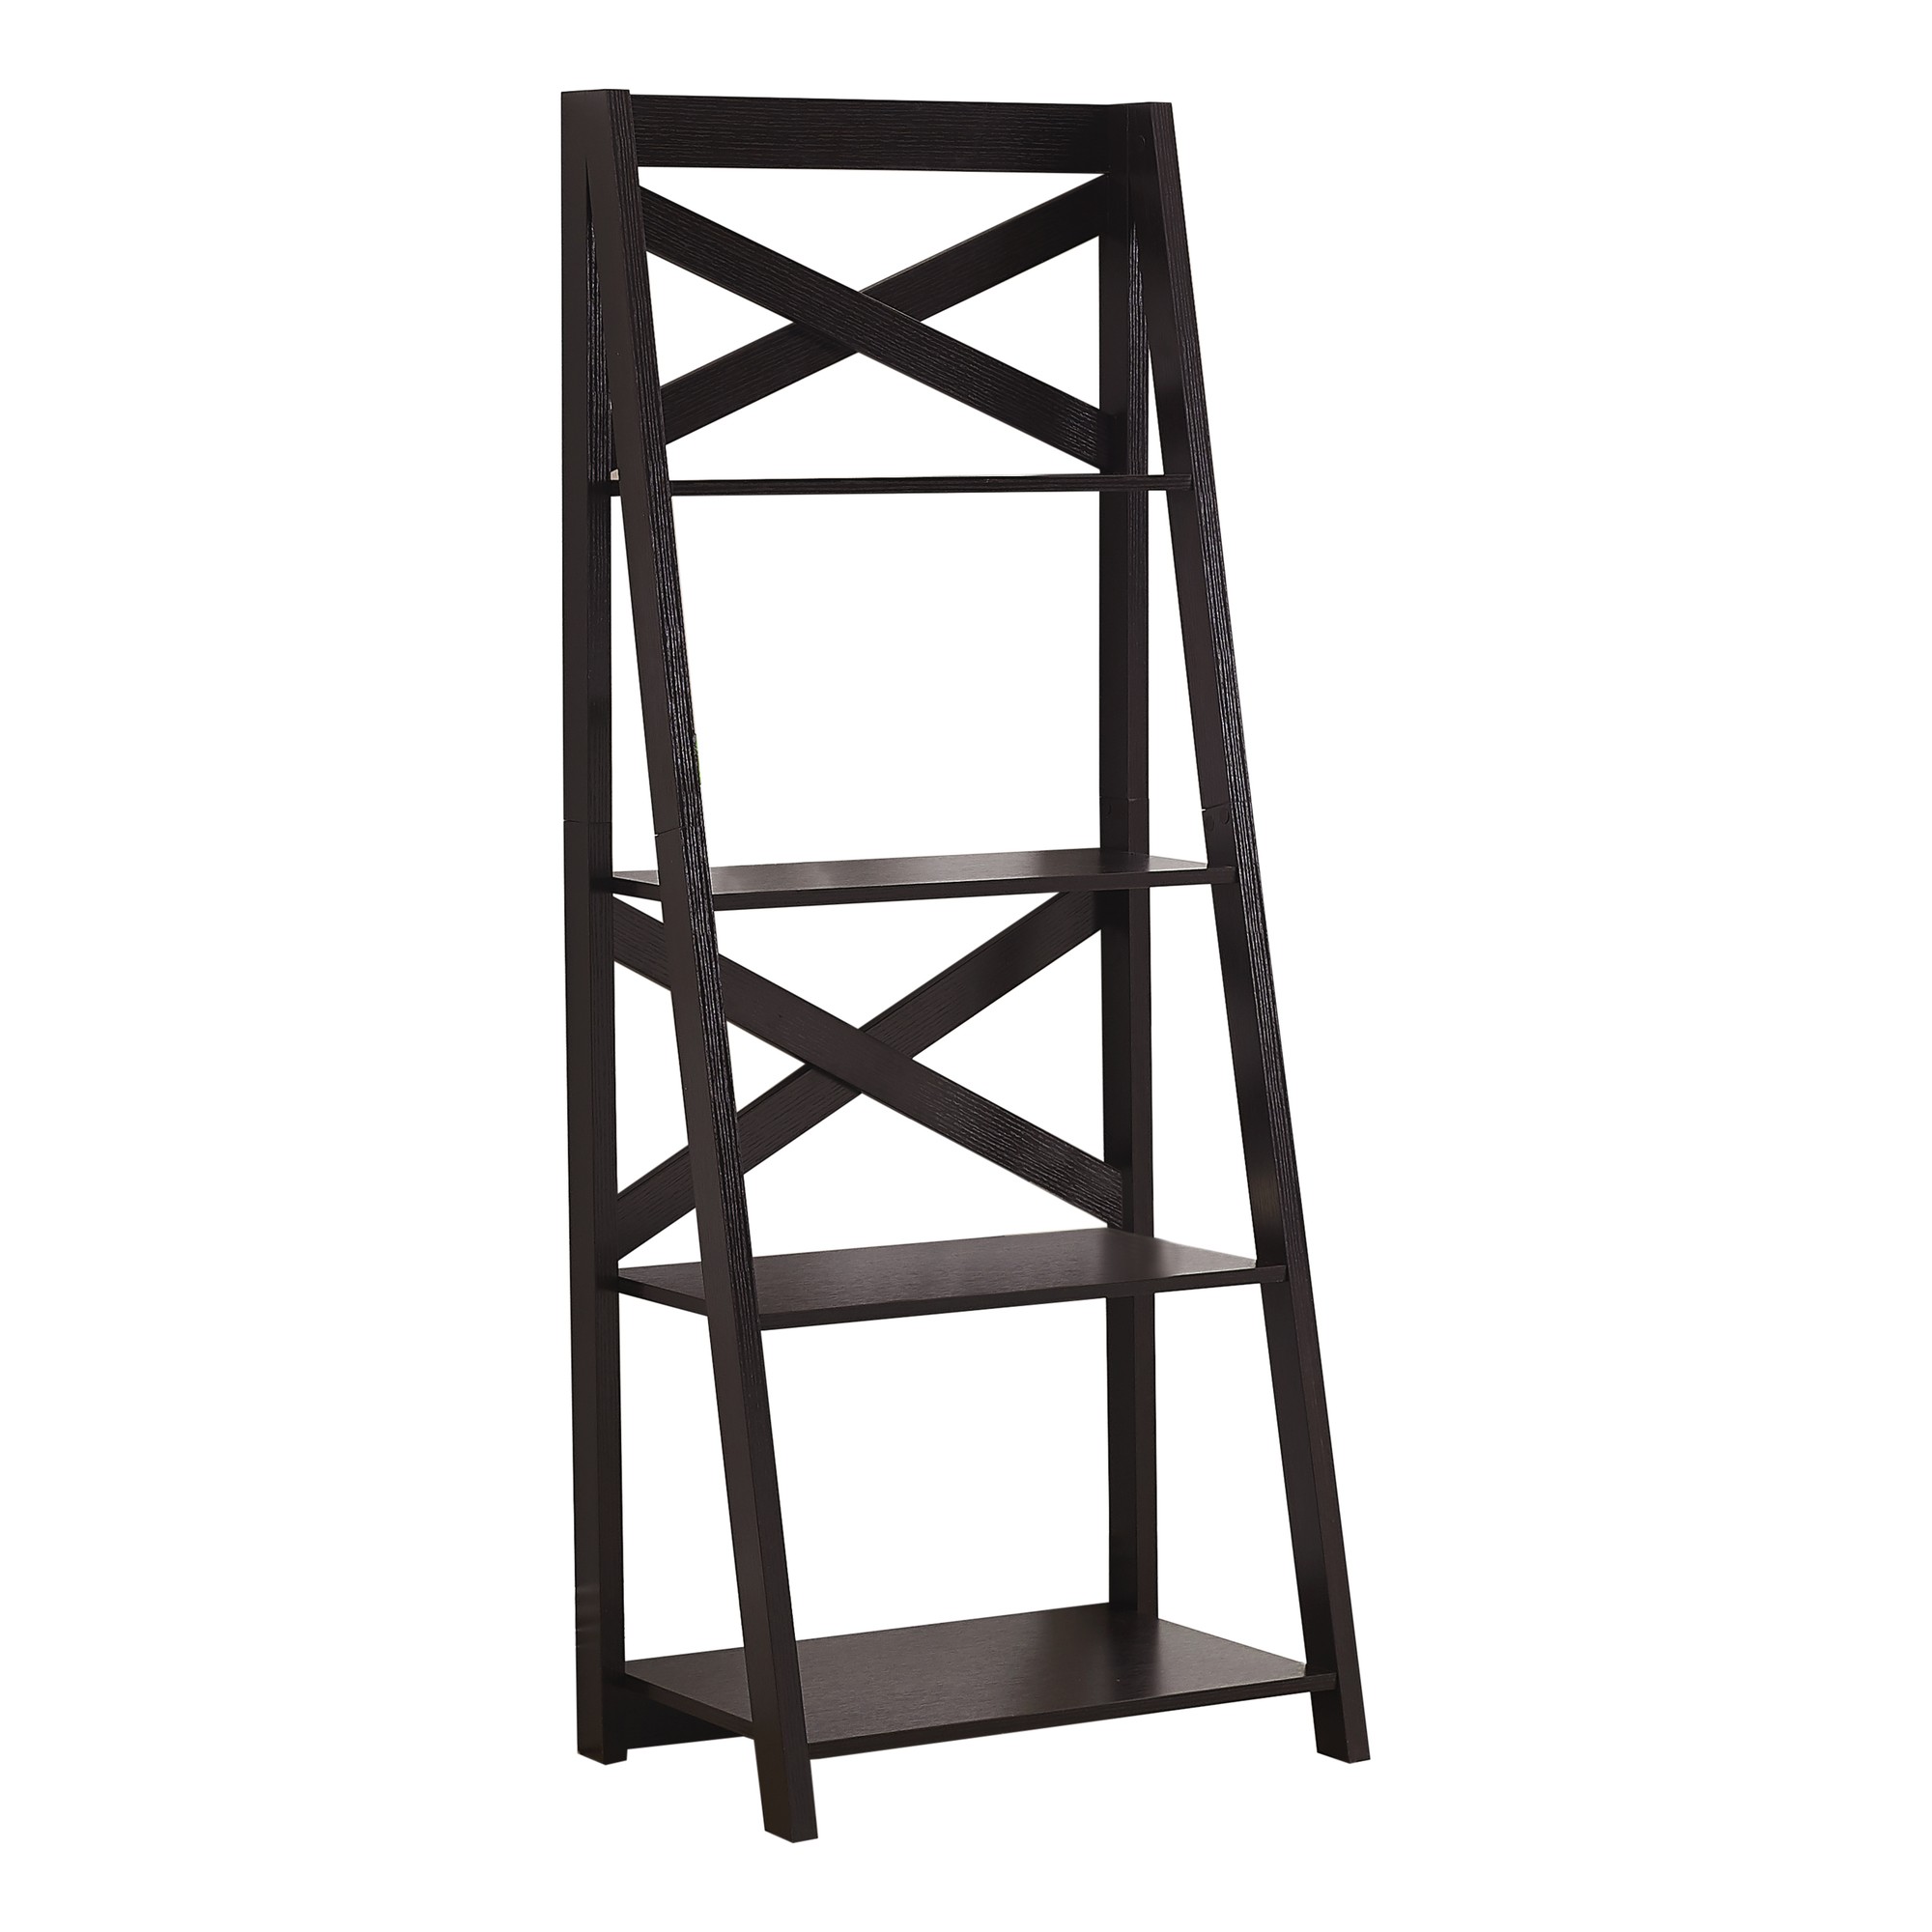 60" Bookcase Espresso Ladder with 4 Shelves